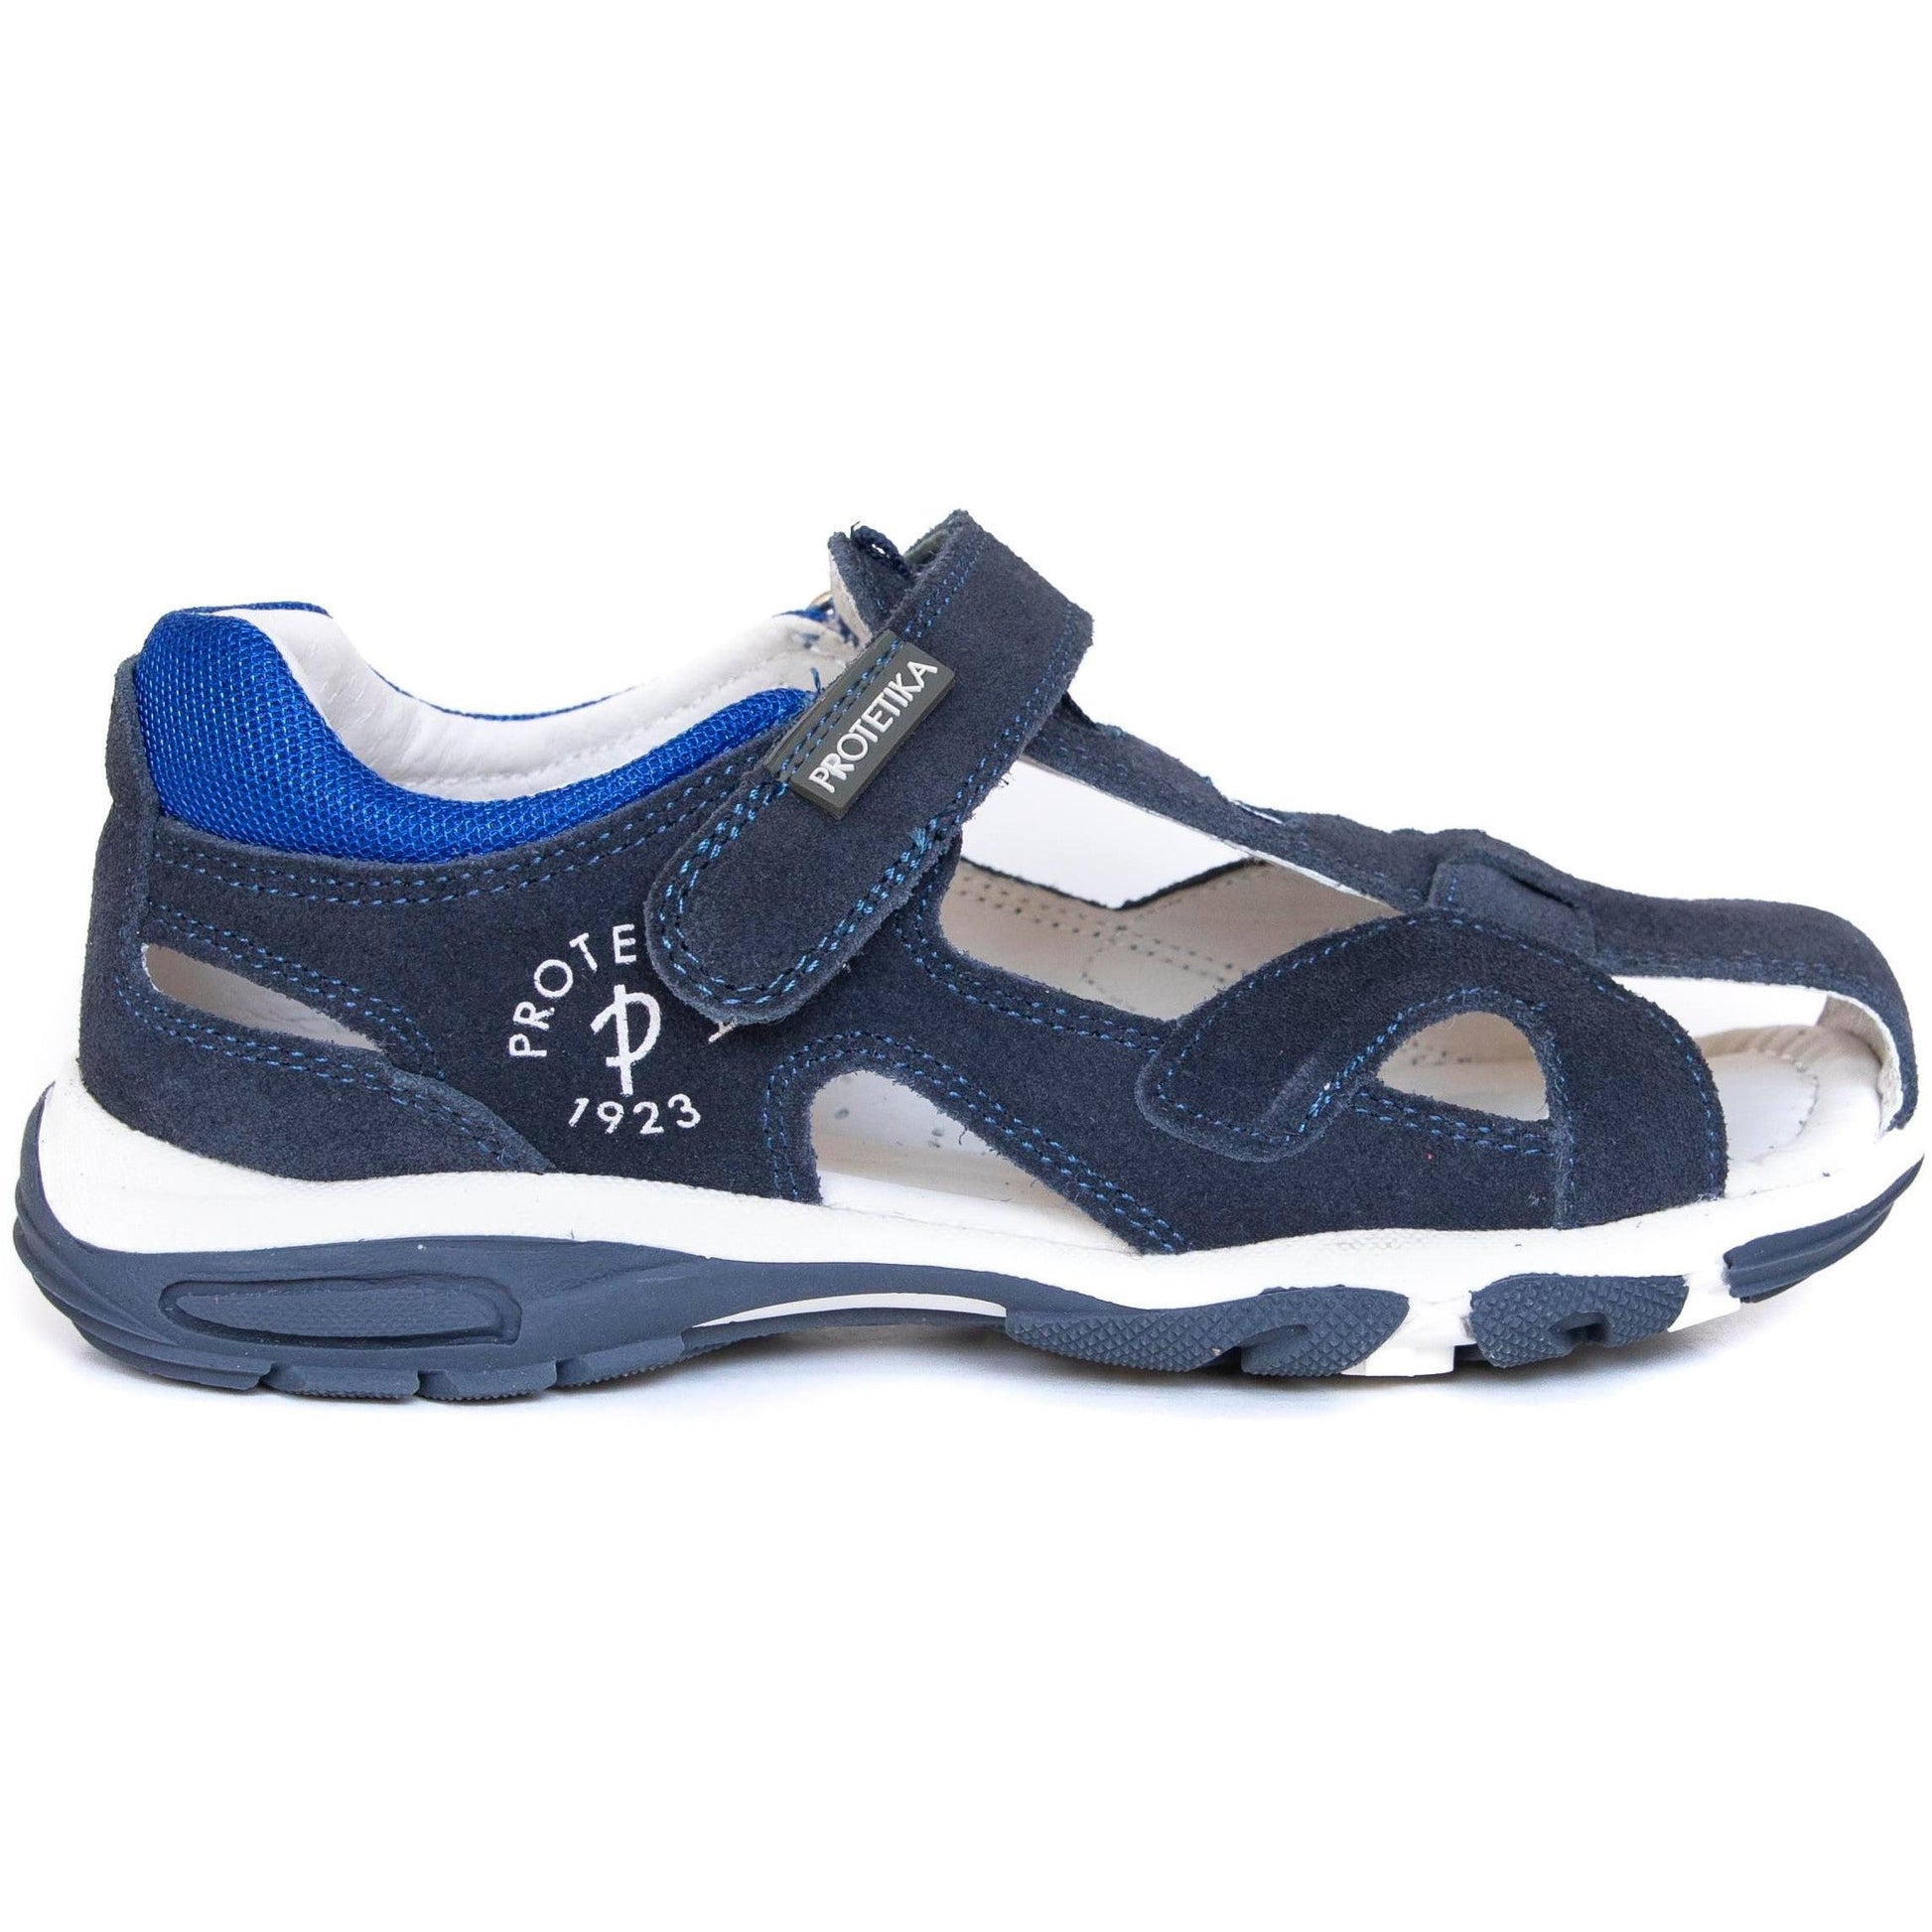 AKRON older boys arch support sandals - feelgoodshoes.ae